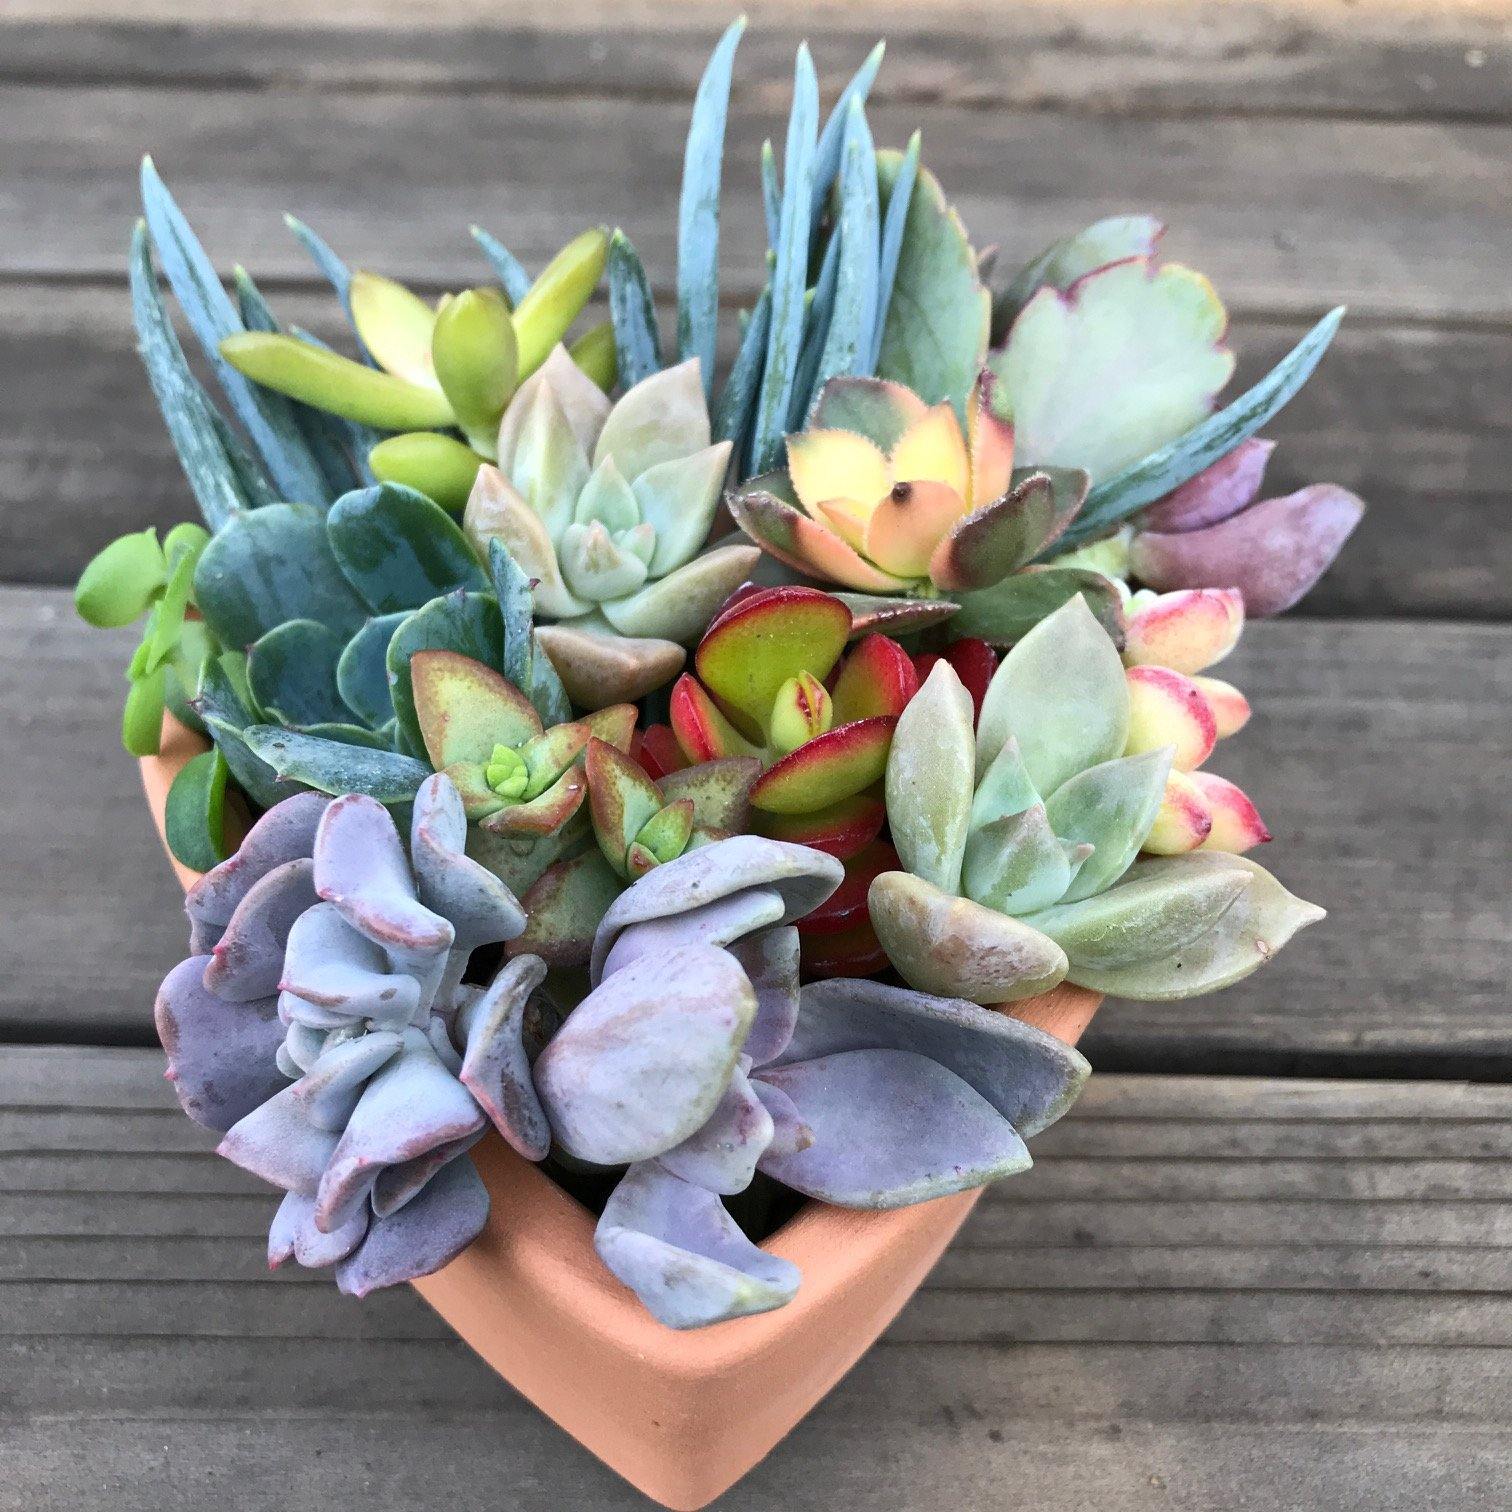 Succulent DIY Kits - Team Building Event - Birthday Gifts | Zensability